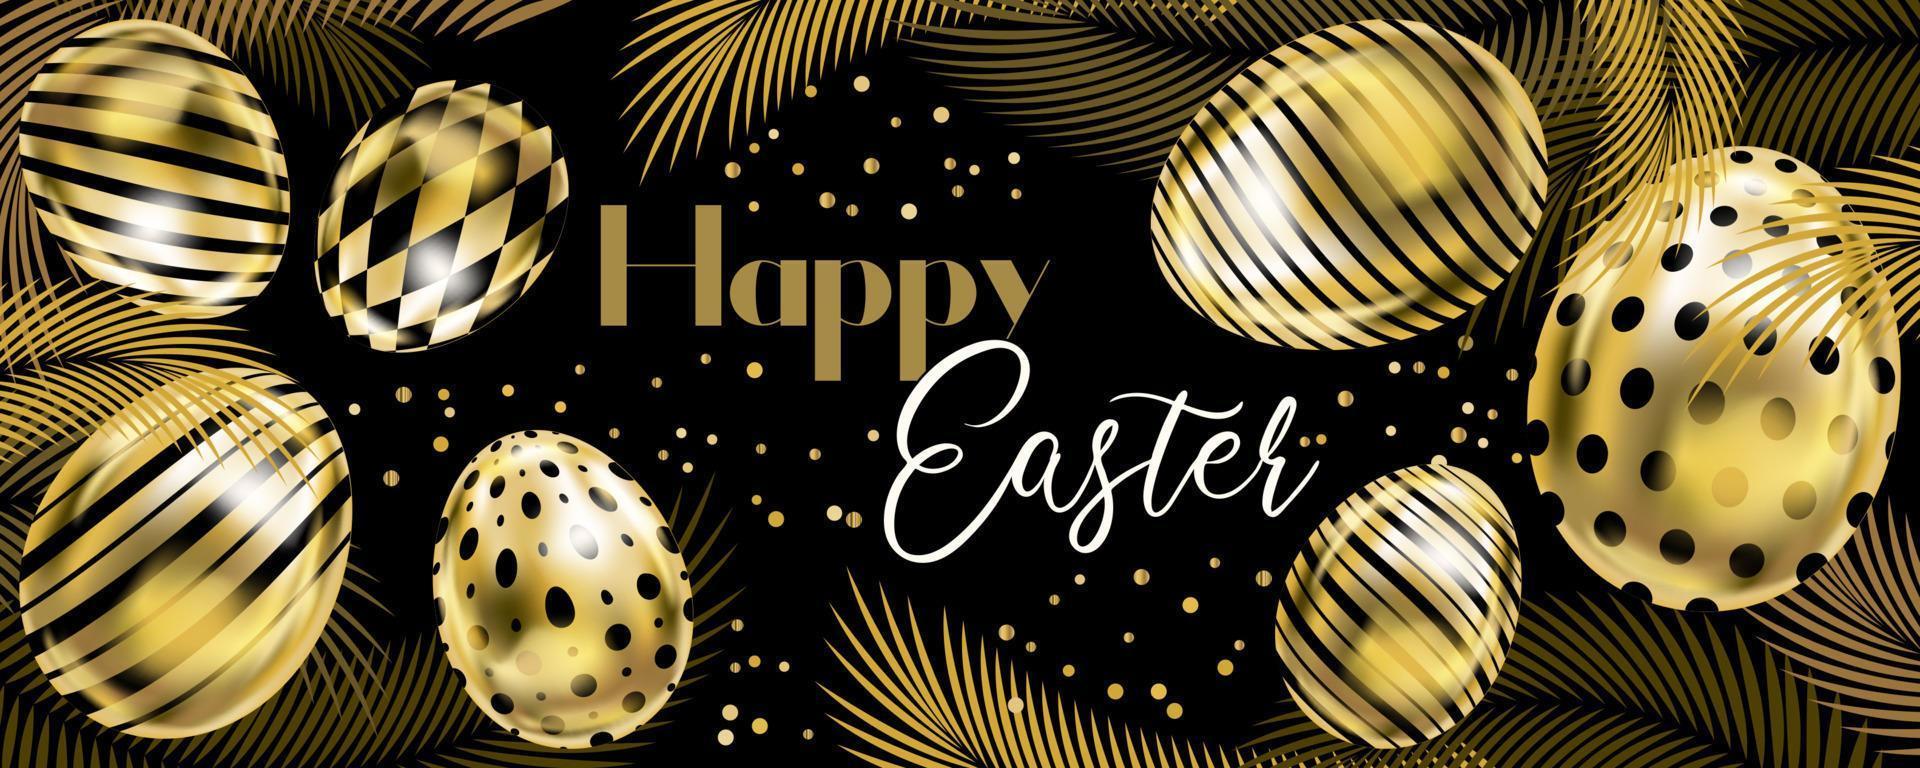 Happy Easter banner with golden eggs and palm branches on the black vector